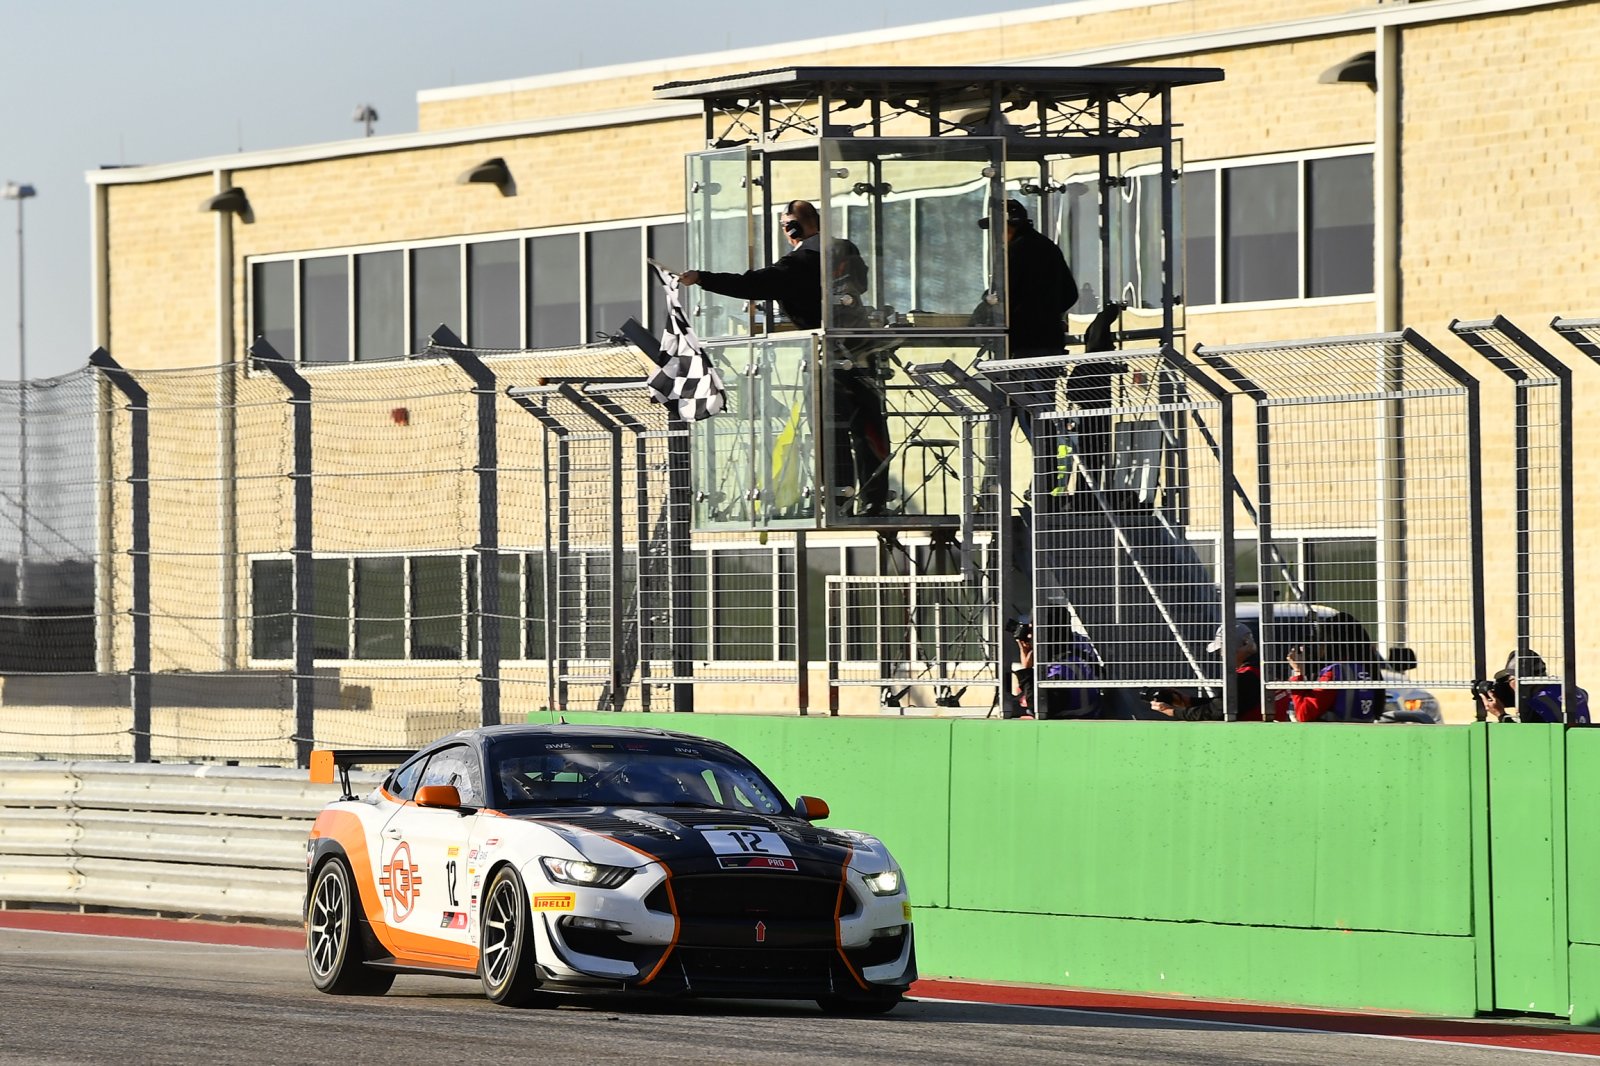 Staveley Victorious in Pirelli GT4 America Pro Debut 